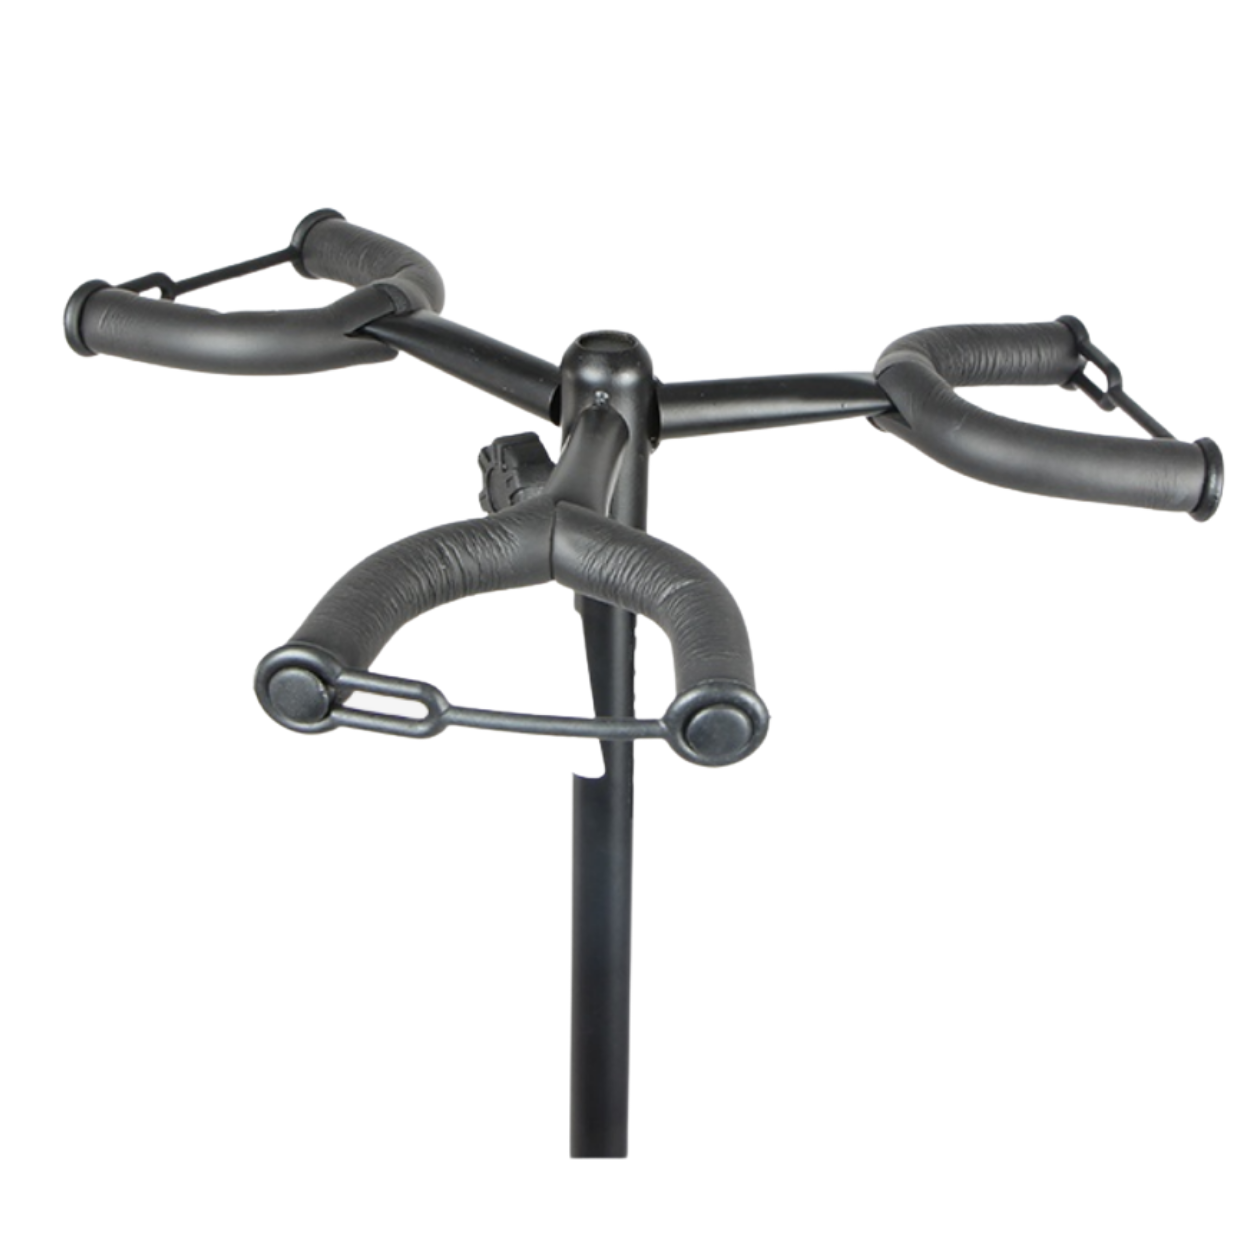 NEOWOOD J33 3IN1 GUITAR STAND, NEOWOOD, STAND, neowood-stand-neo-j33, ZOSO MUSIC SDN BHD